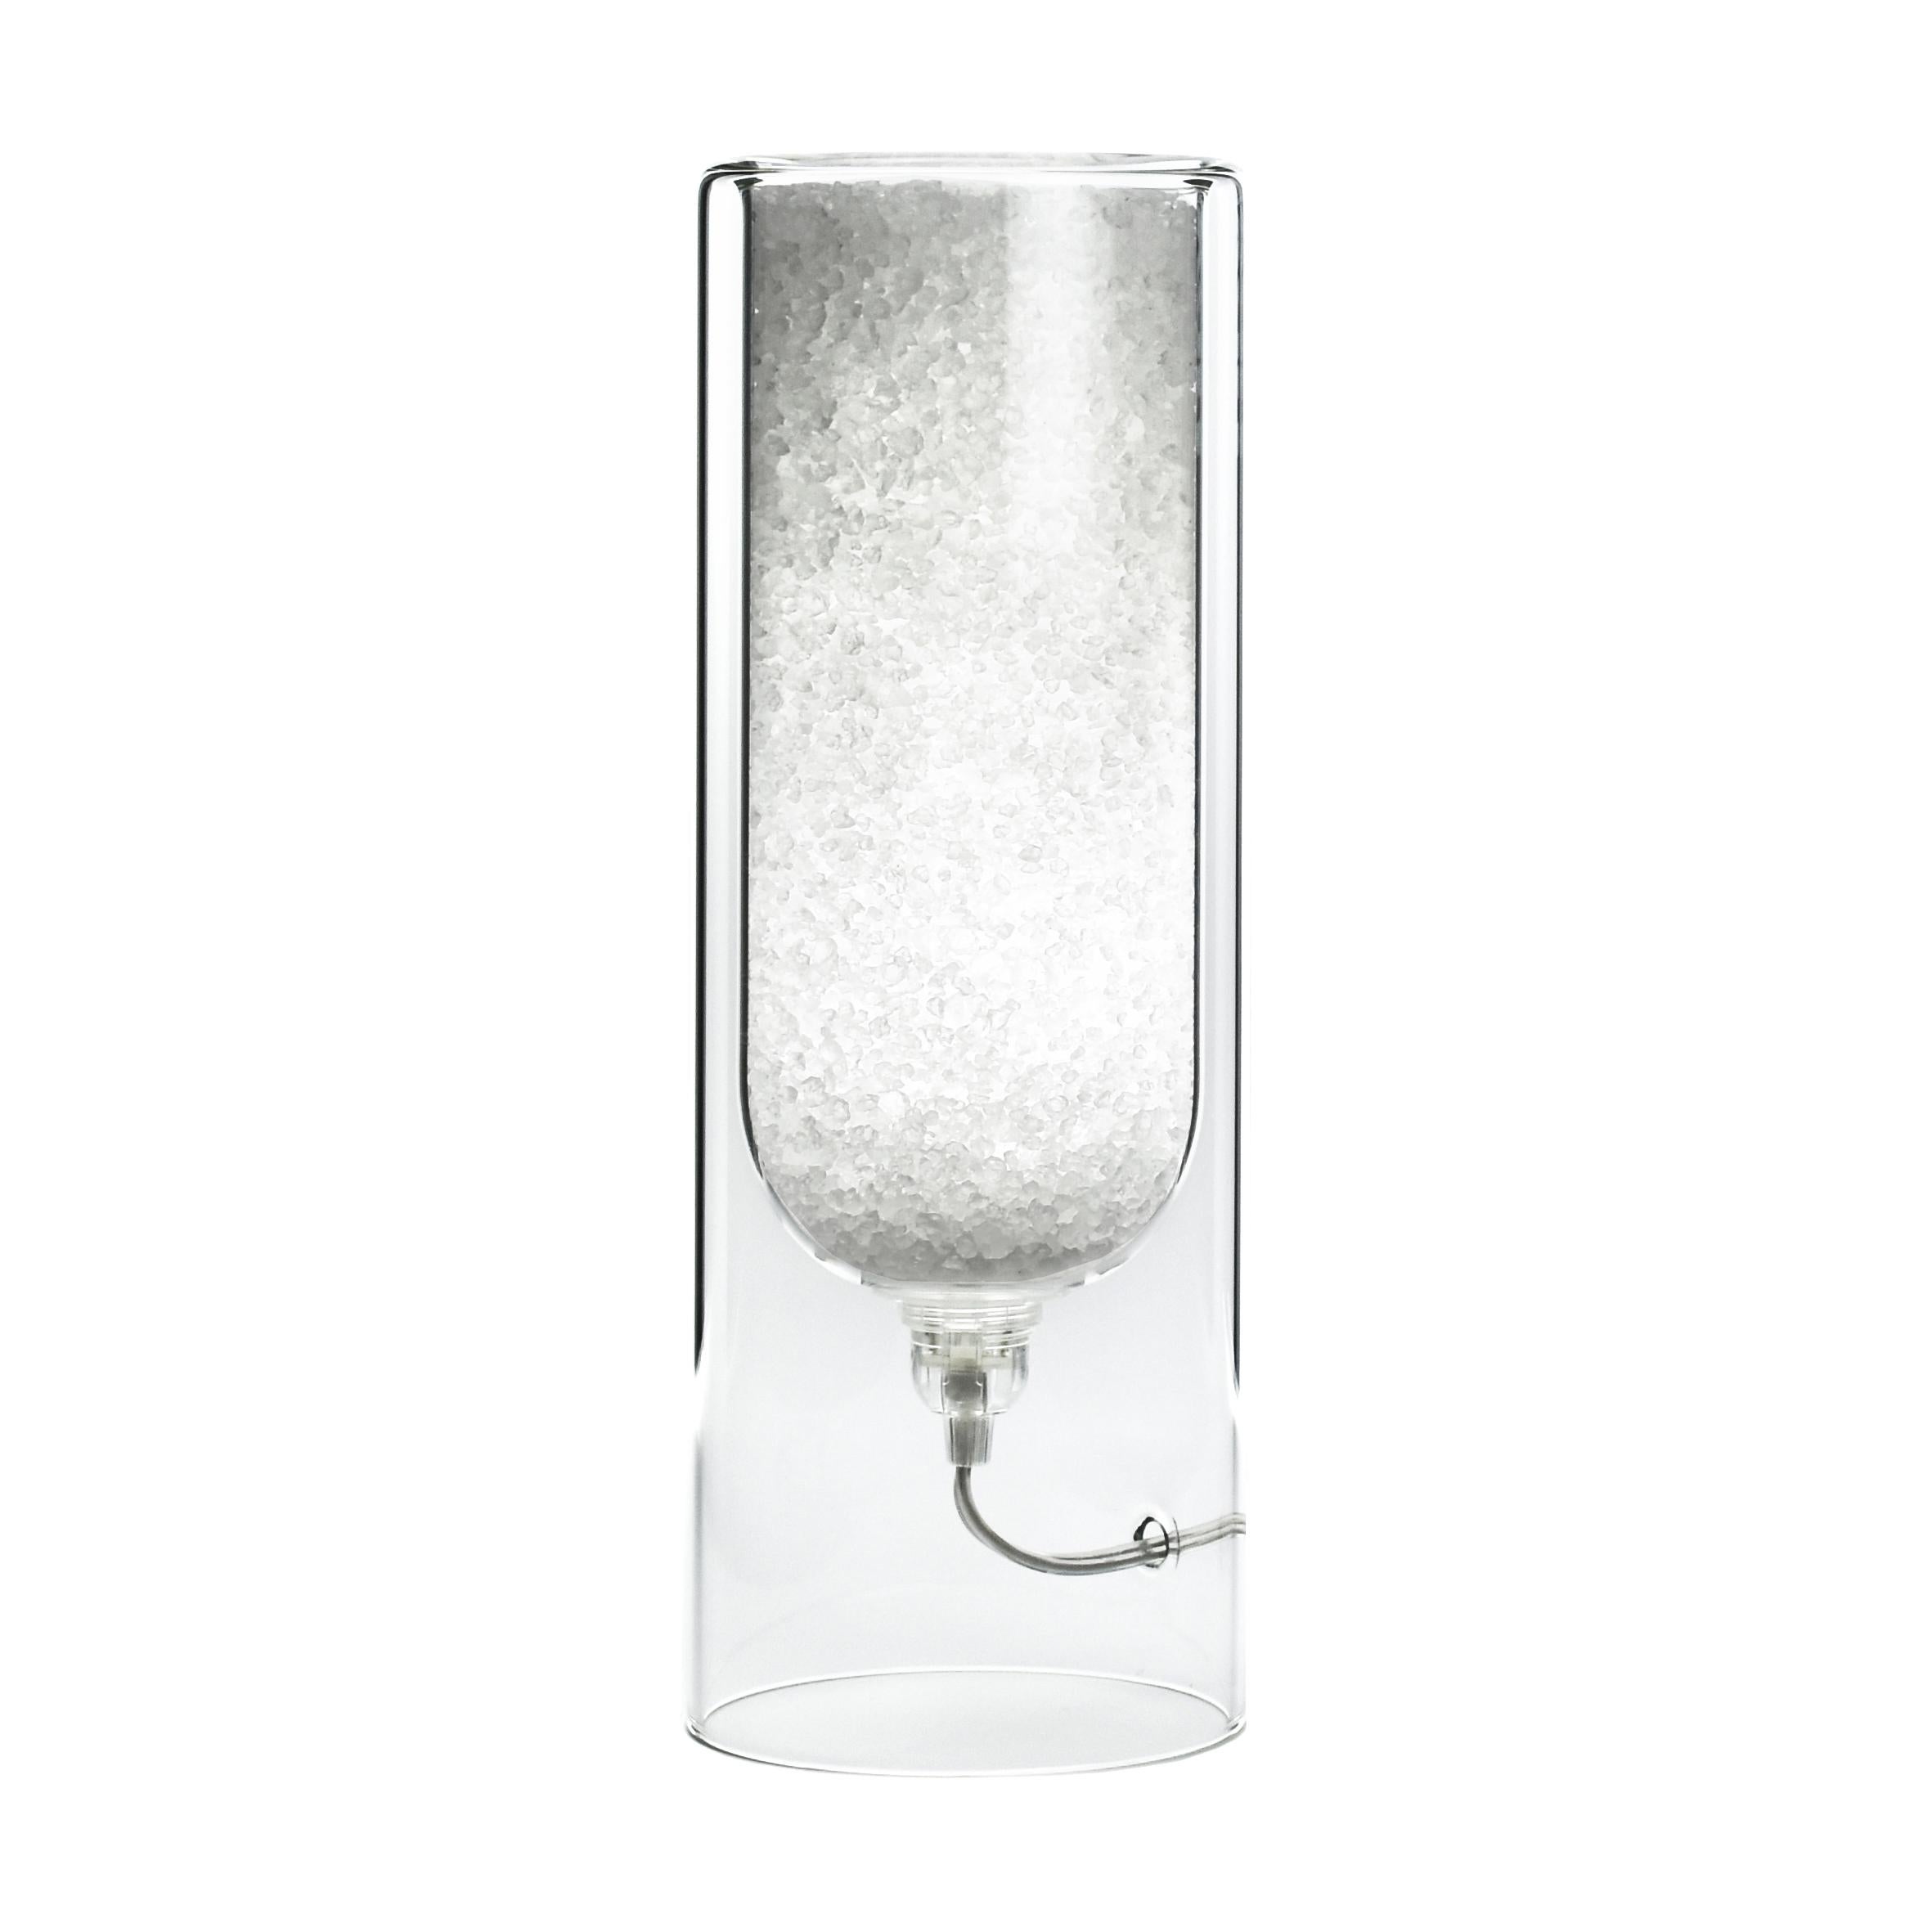 White Rocklumìna XXS table lamp by Coki Barbieri.
Dimensions: W 12 x D 12 x H 33.5 cm.
Materials: Italian rock salt crystals colored with natural pigments, mineral pigments from Italian soil and borosilicate glass.

All our lamps can be wired